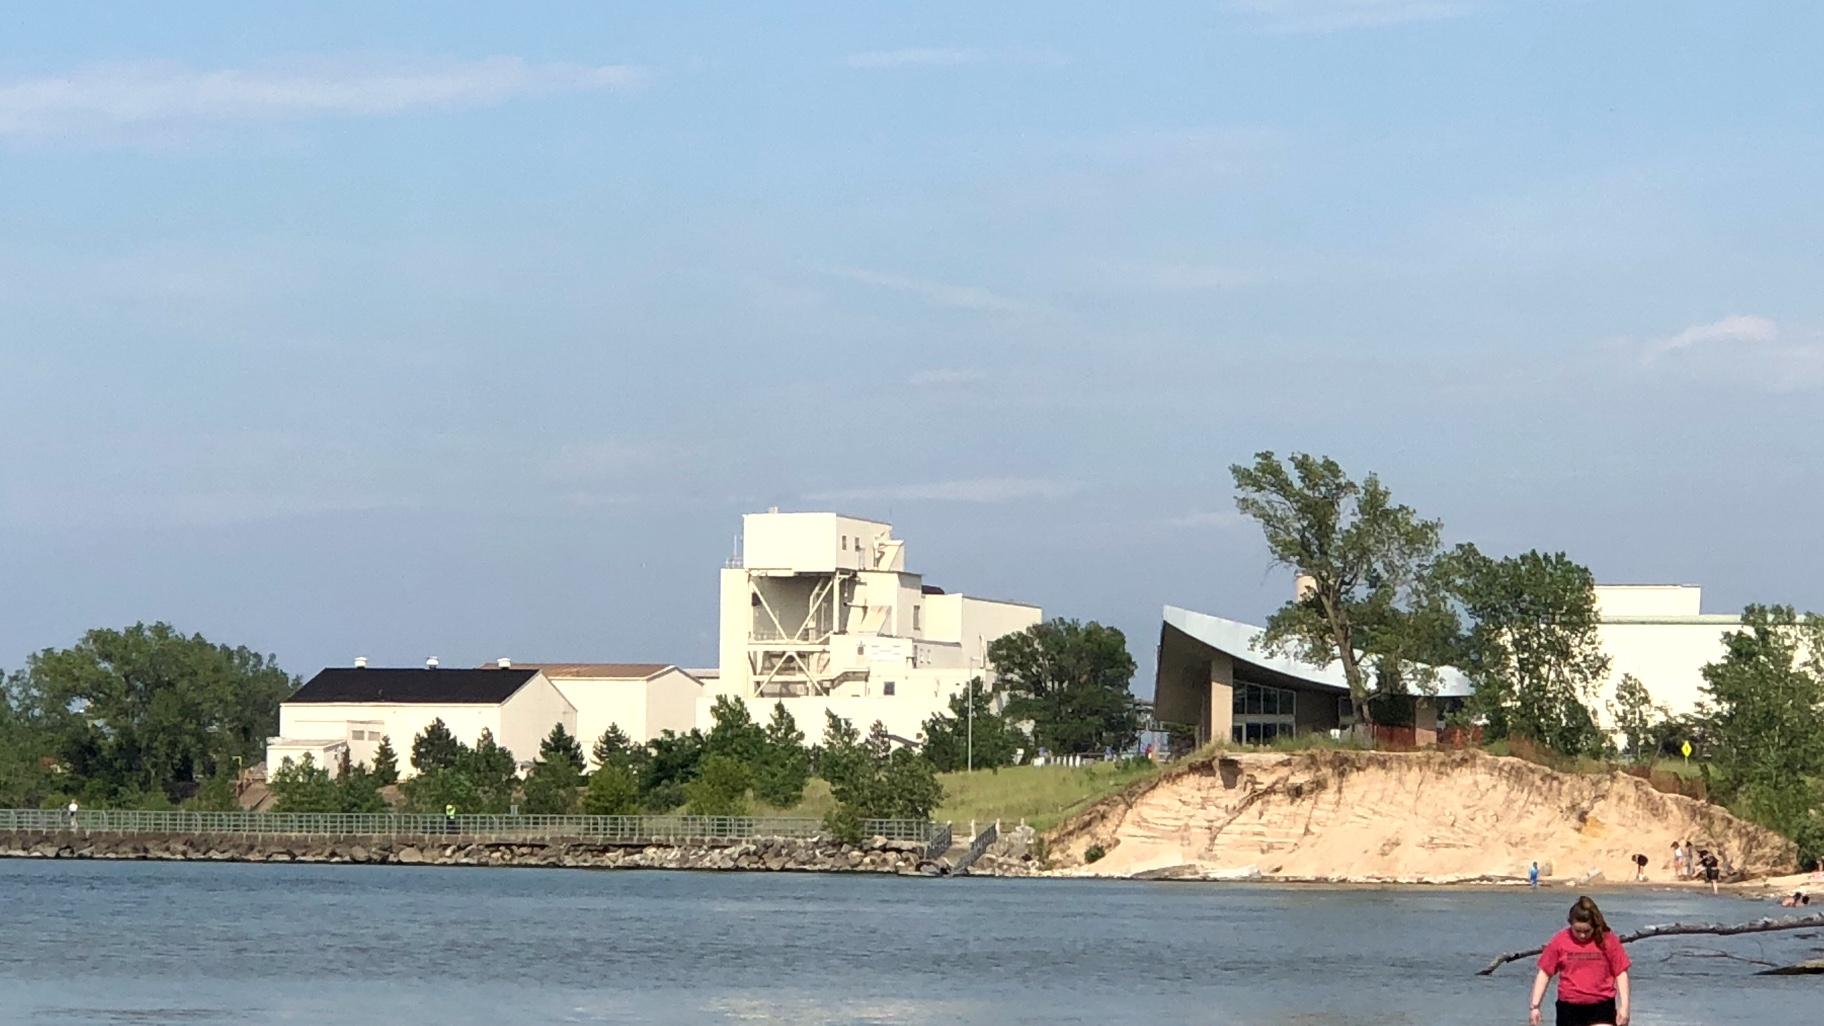 U.S. Steel Midwest Plant on the shore of Lake Michigan, with the Indiana Dunes Portage Lakefront and Riverwalk Trail in the foreground, in 2019. (Patty Wetli / WTTW News)